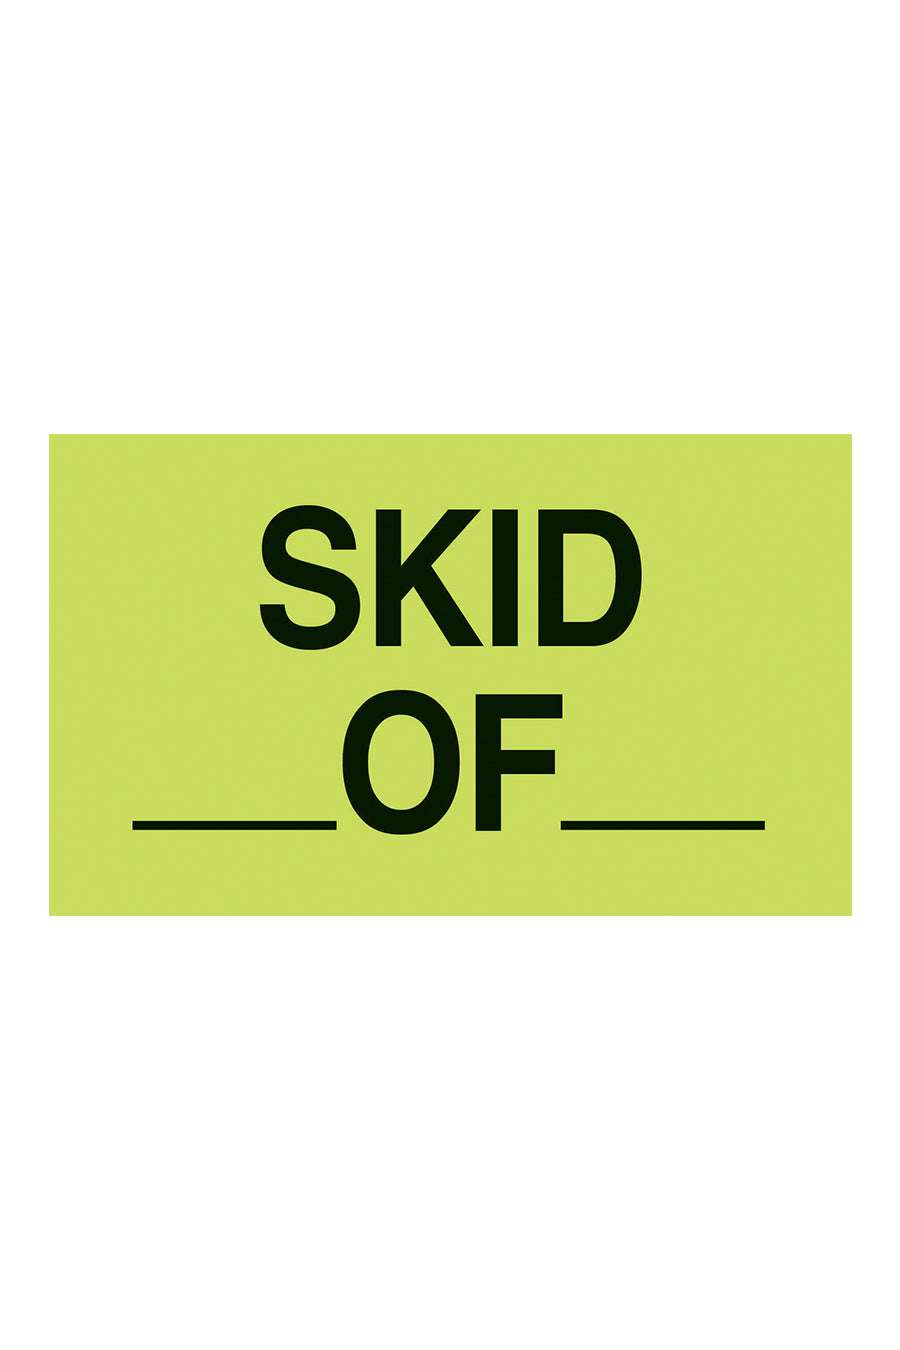 "Skid ____ Of ____", 3" x 5", Fluorescent Green, 500 Labels/Roll